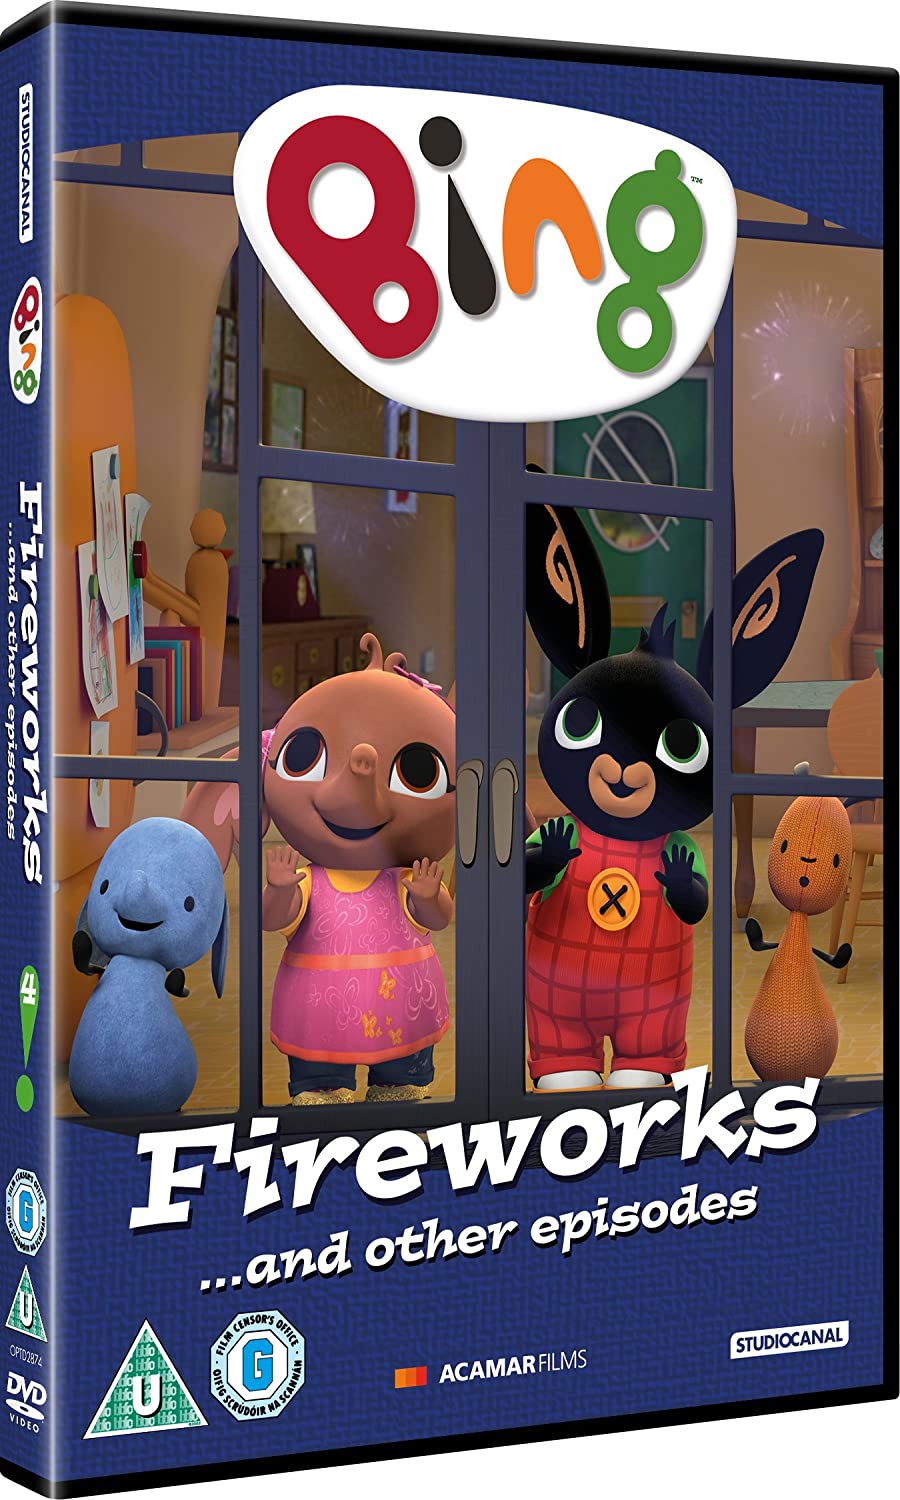 Bing - Fireworks and Other Episodes - Comedy [DVD]